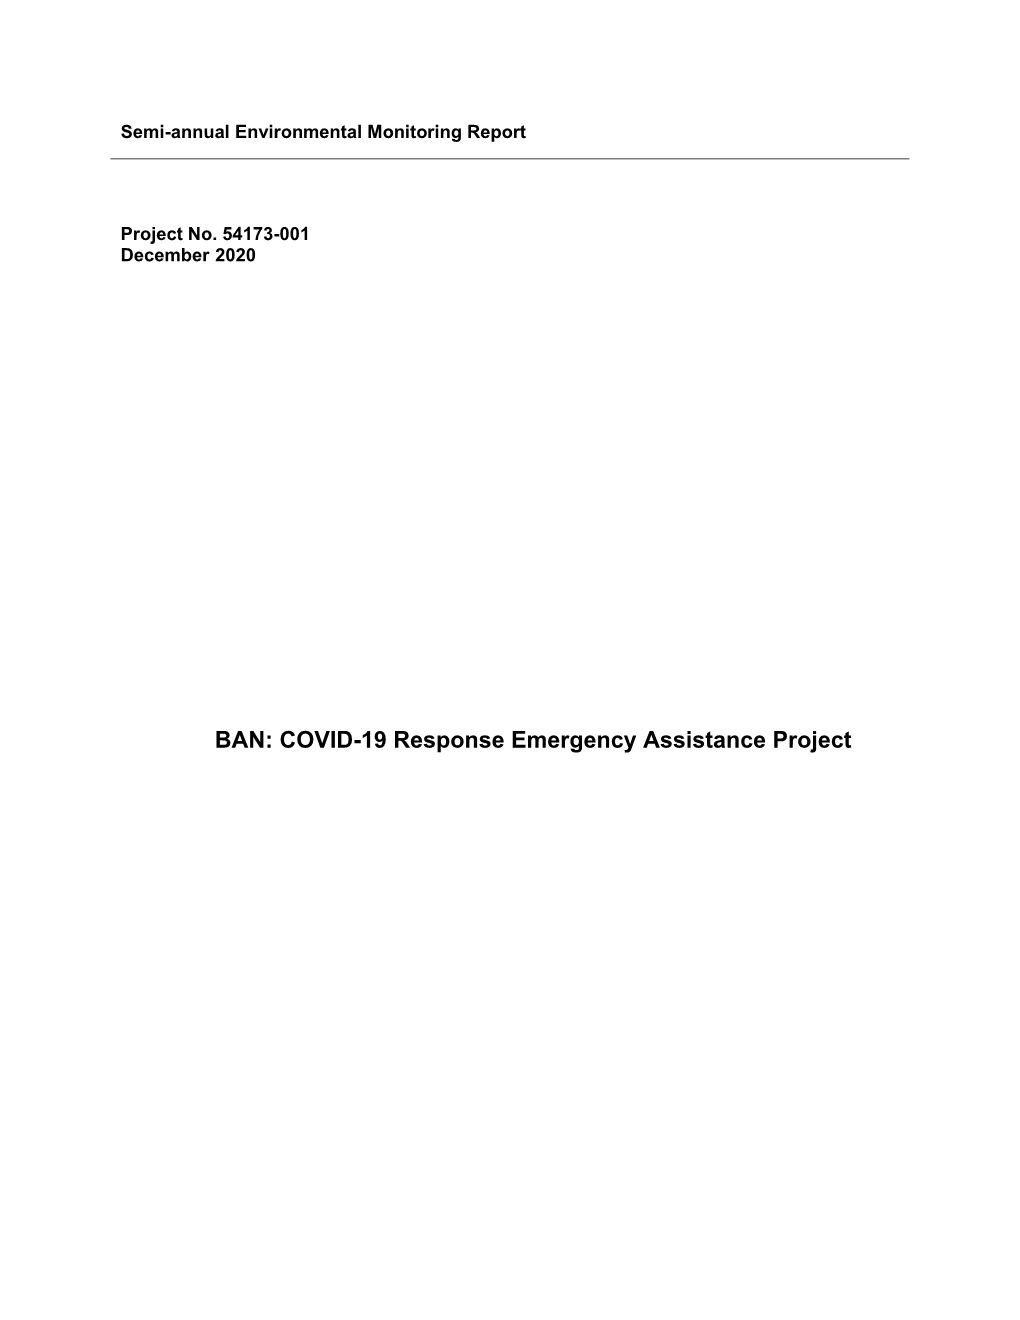 54173-001: COVID-19 Response Emergency Assistance Project